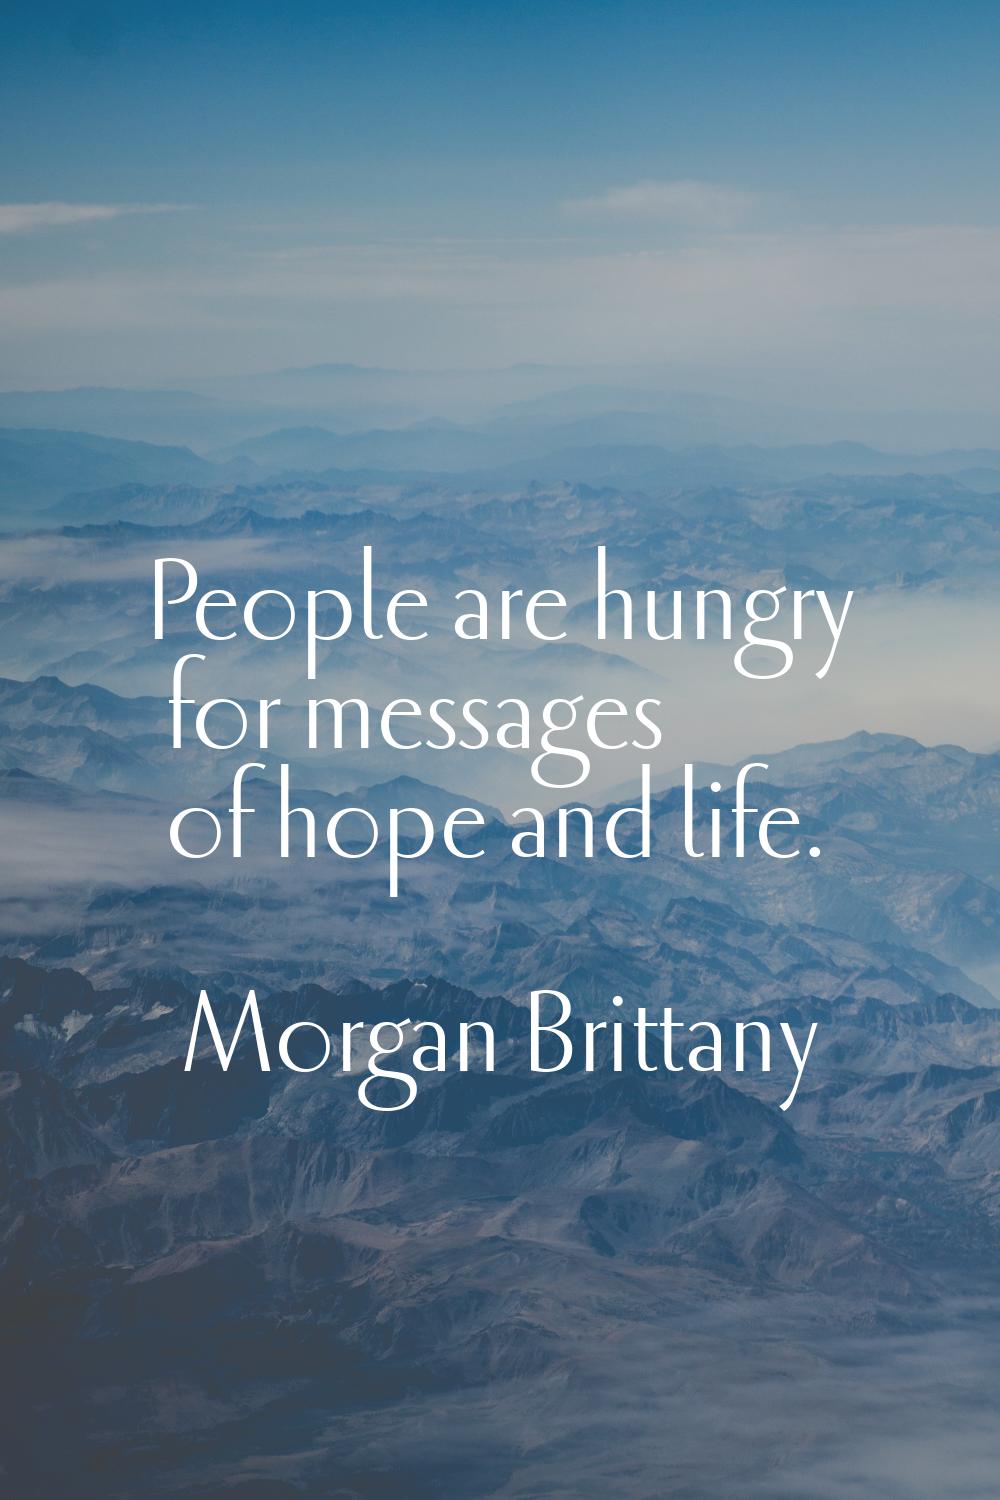 People are hungry for messages of hope and life.